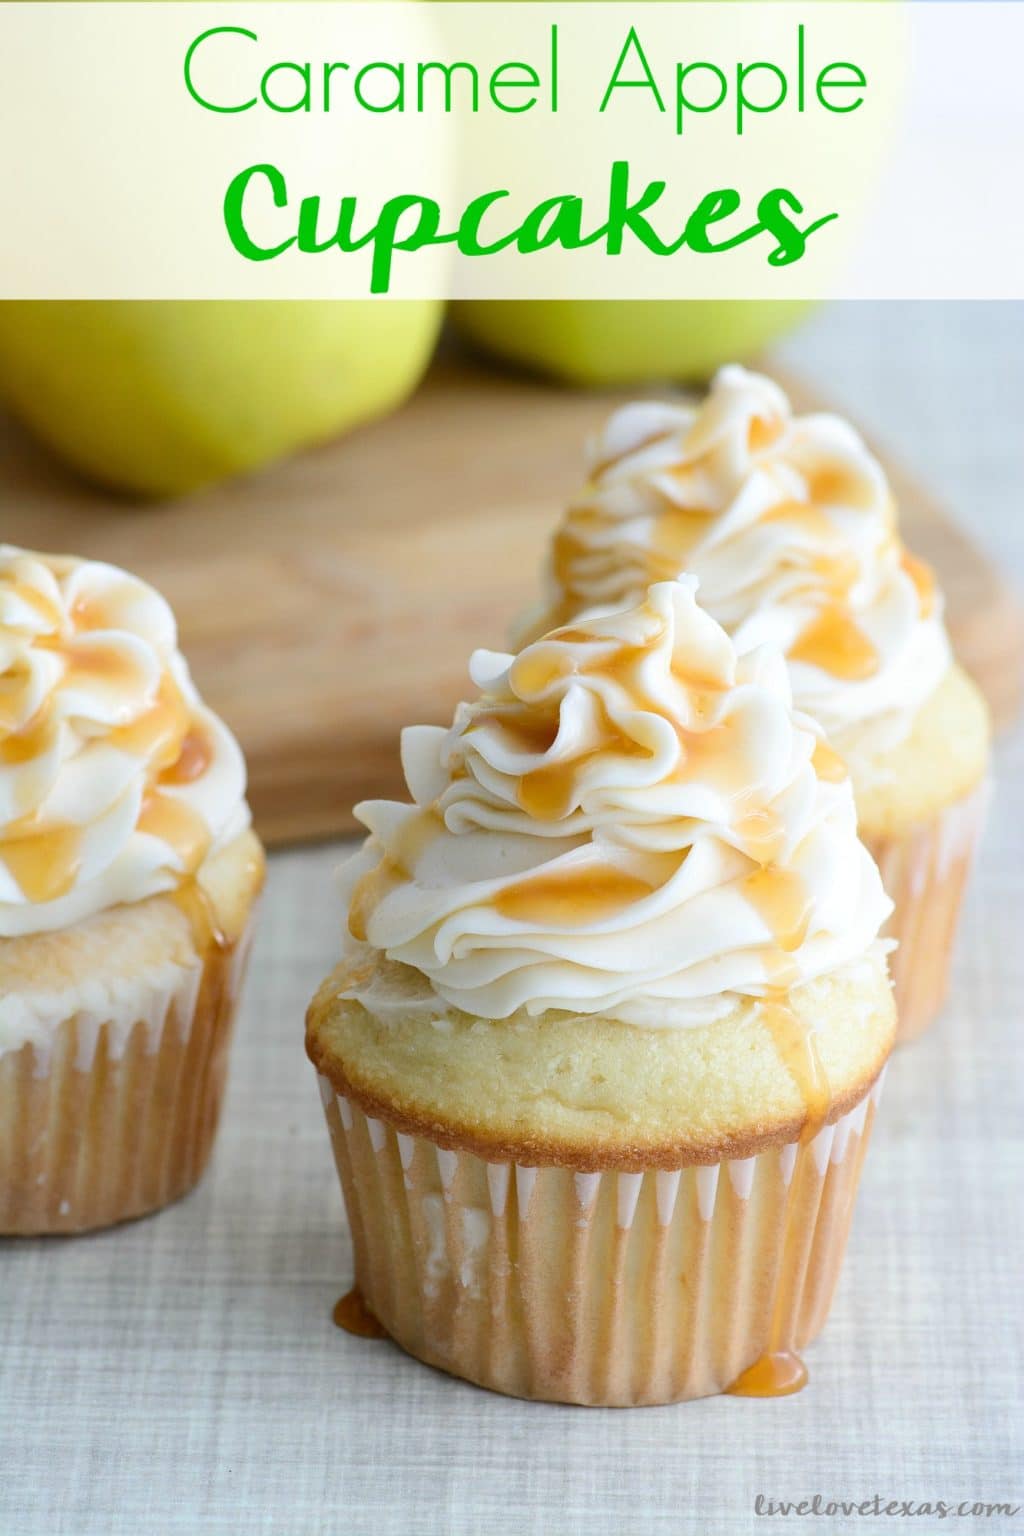 This easy Caramel Apple Cupcakes recipe combines apple cupcakes from scratch with a homemade caramel buttercream frosting to take it over the top and get you ready for all things fall! 